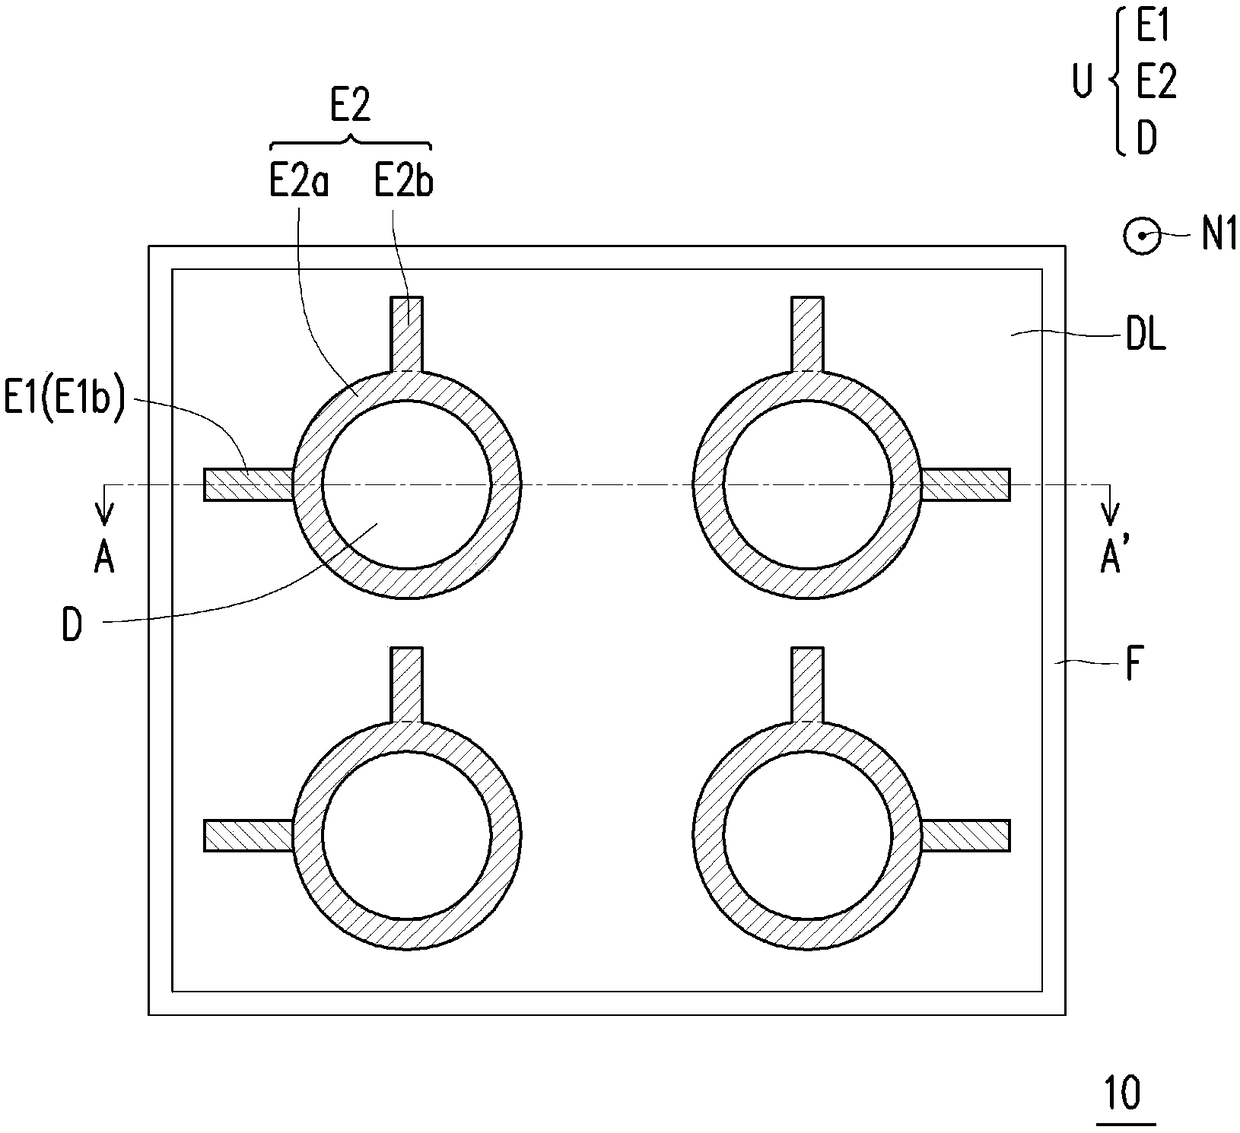 Speaker structural layer and display